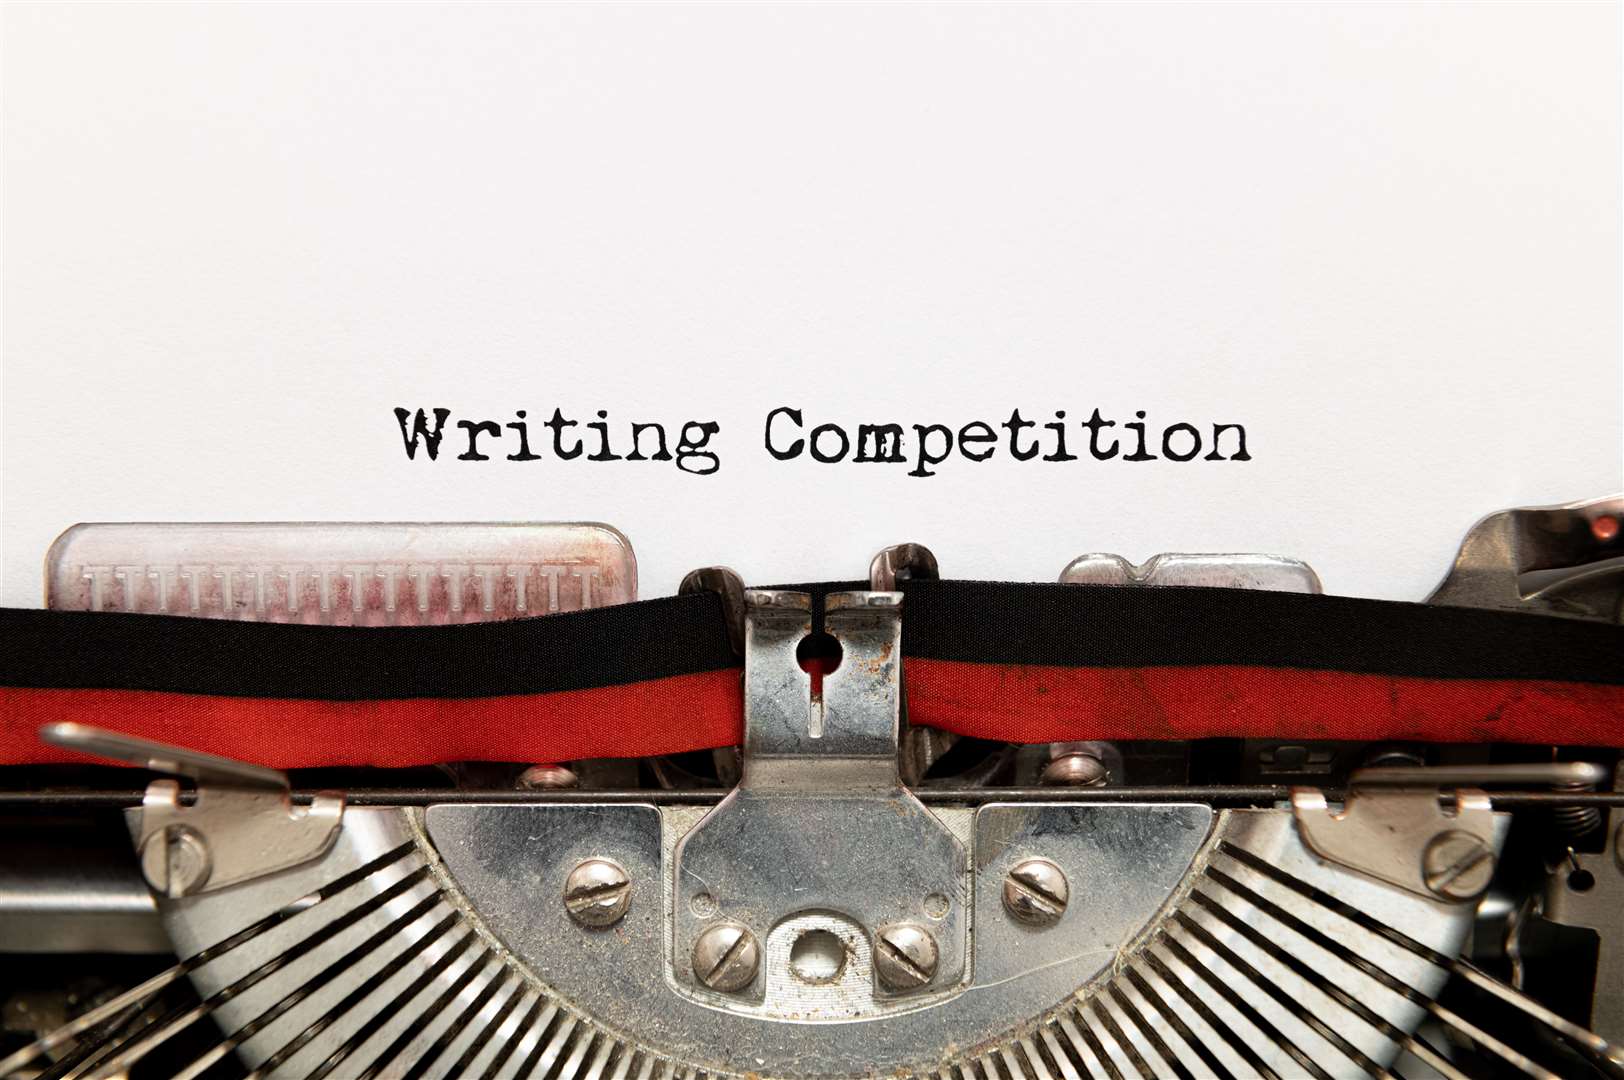 There are four sections to the competition and entries must be submitted by a deadline of Friday, March 8.